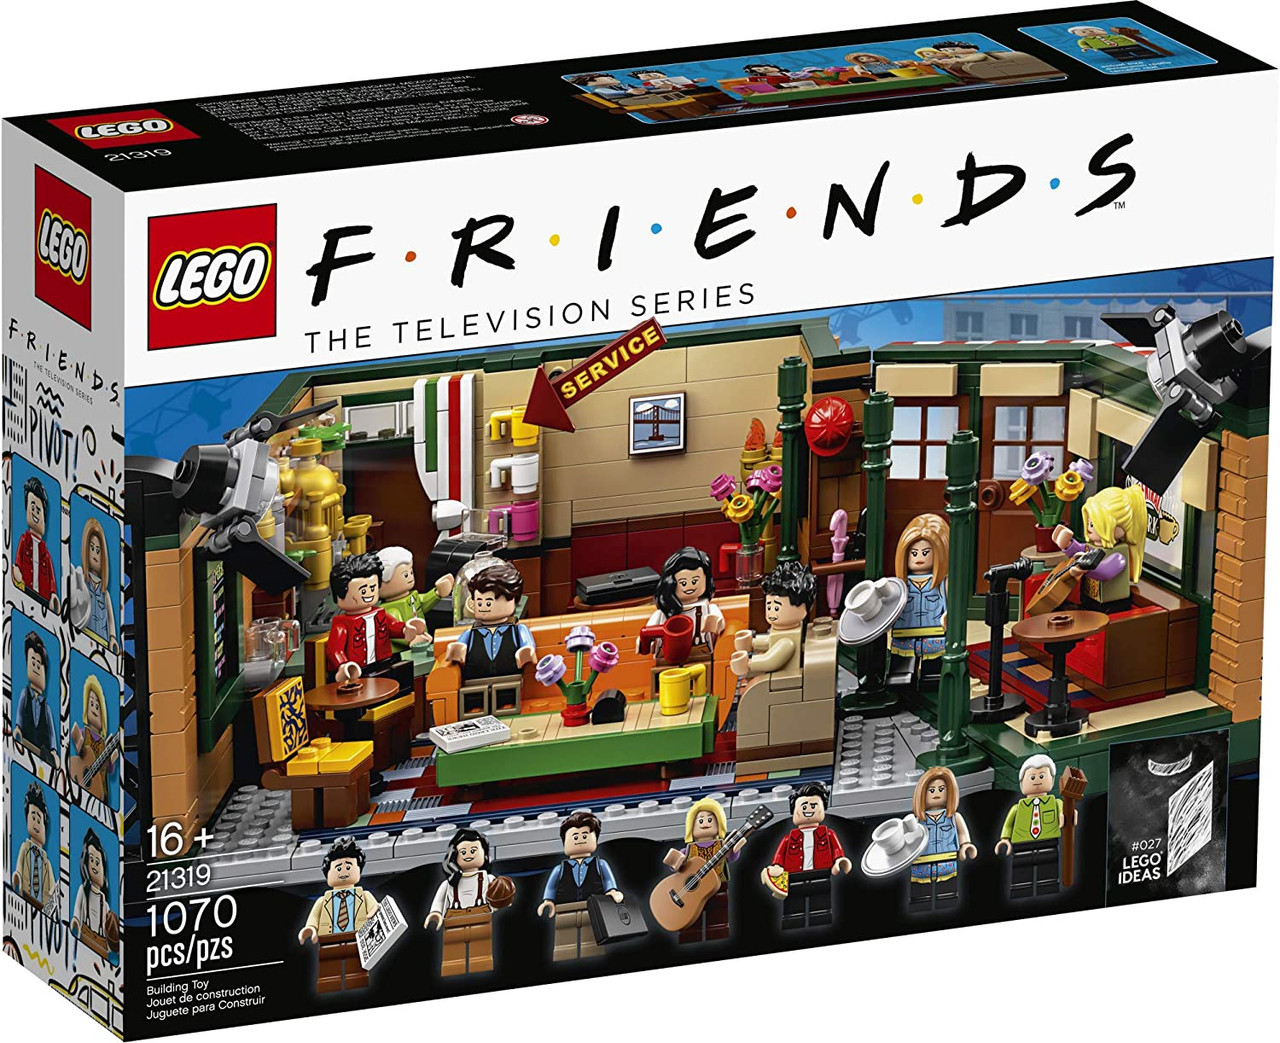 LEGO Friends The Television Series Central Perk Building Set #1070